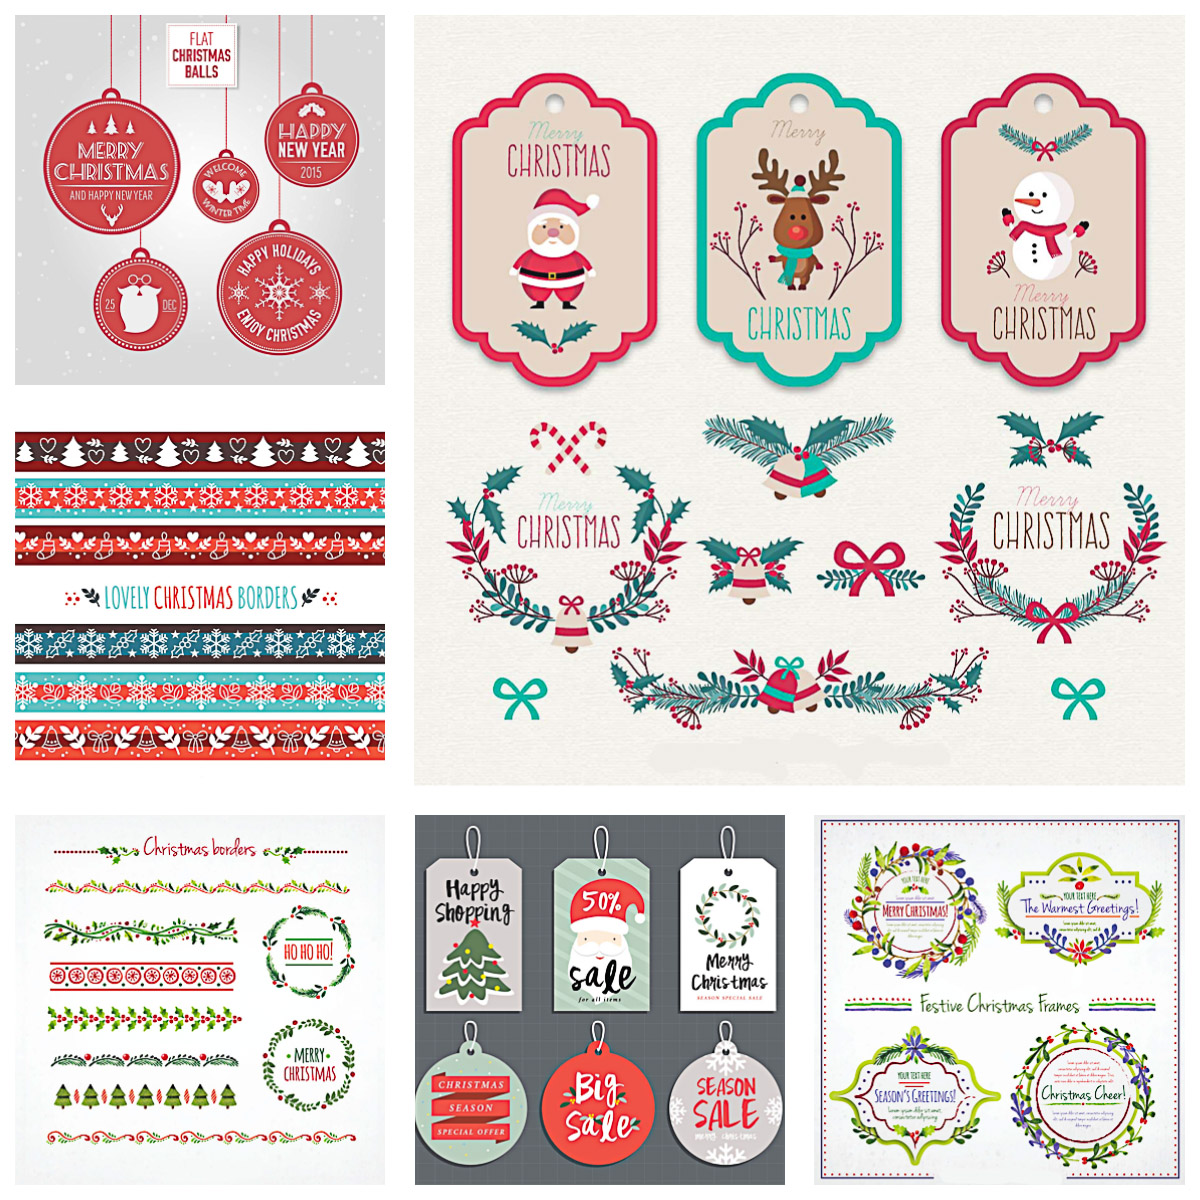 Lovely Christmas design elements collection